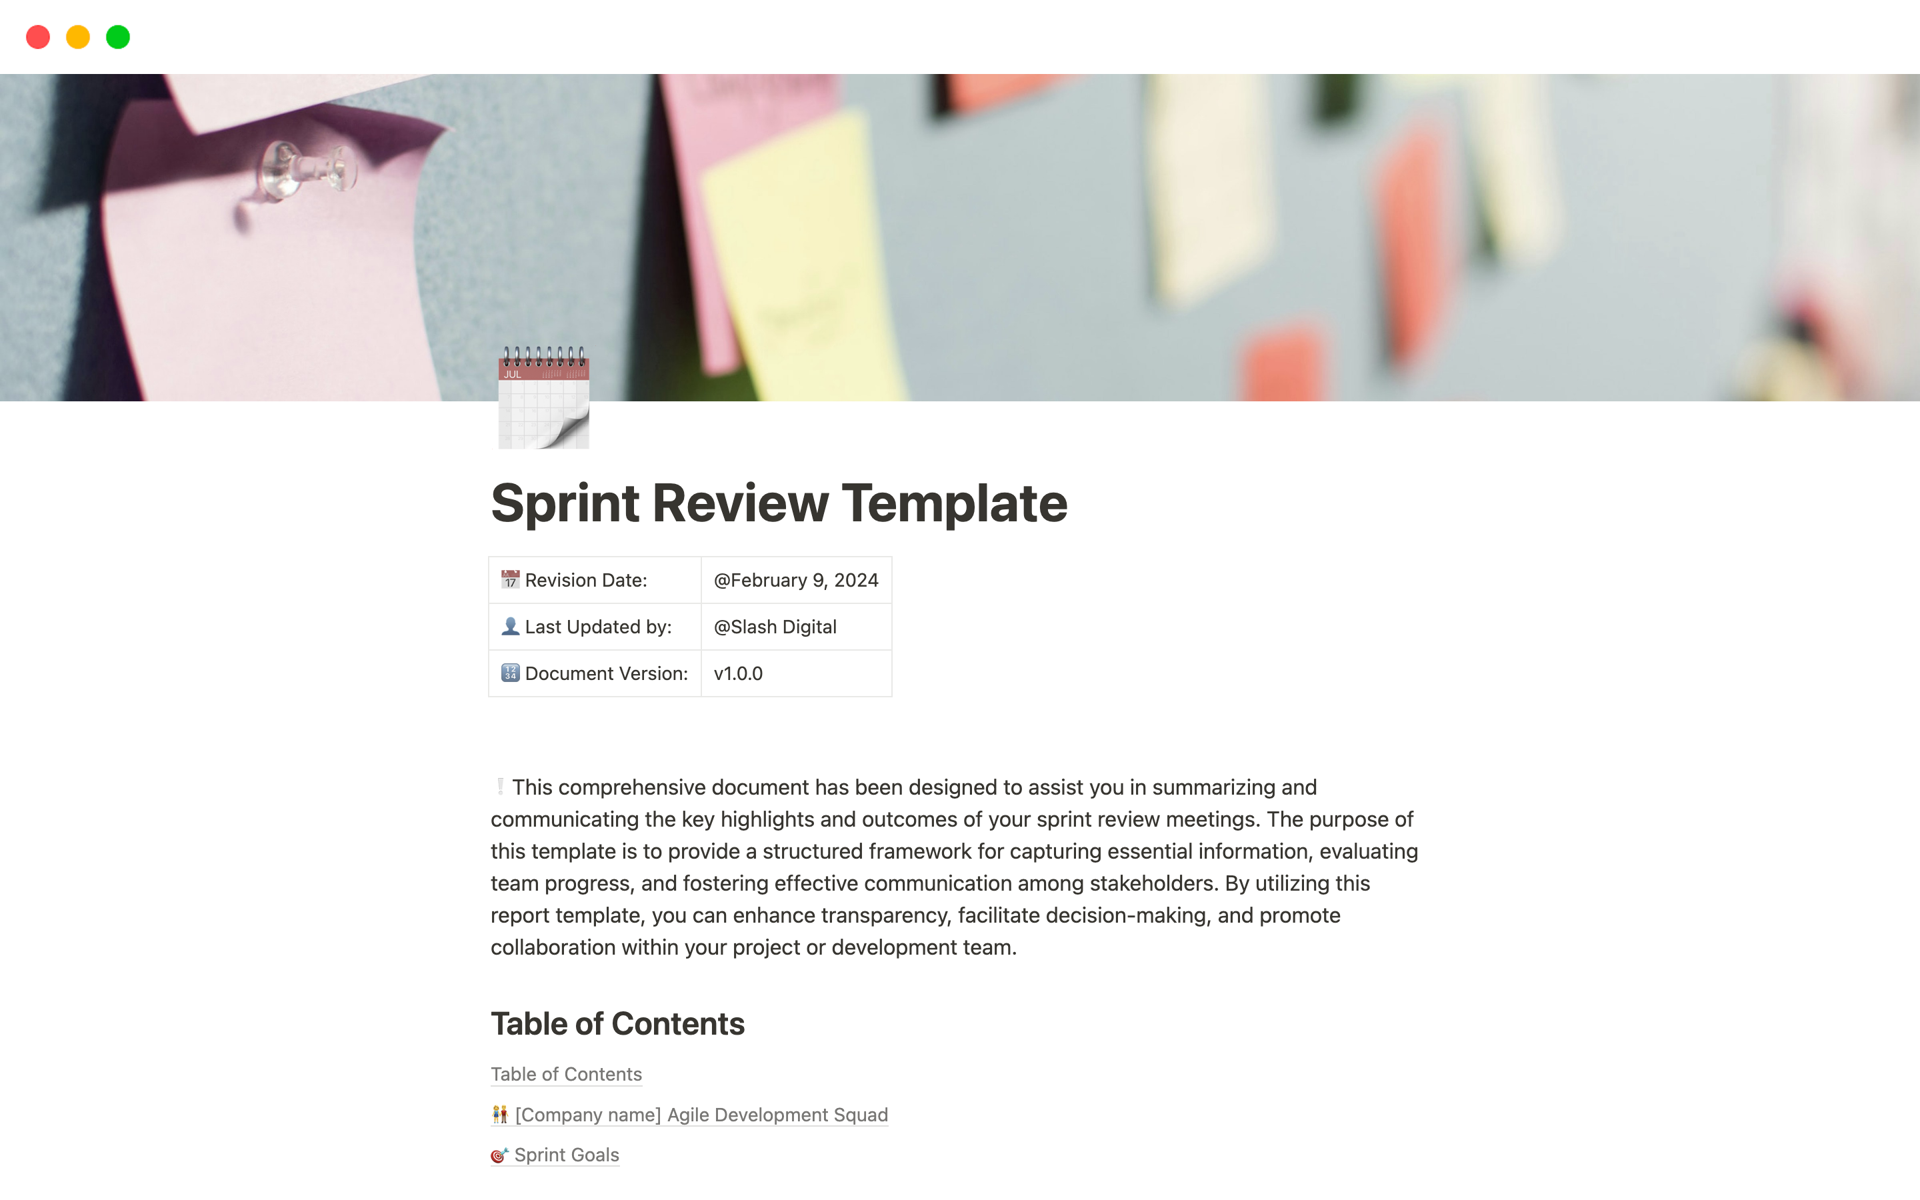 Let's explore how we can conduct better sprint reviews using this handy template and other strategies to improve client satisfaction